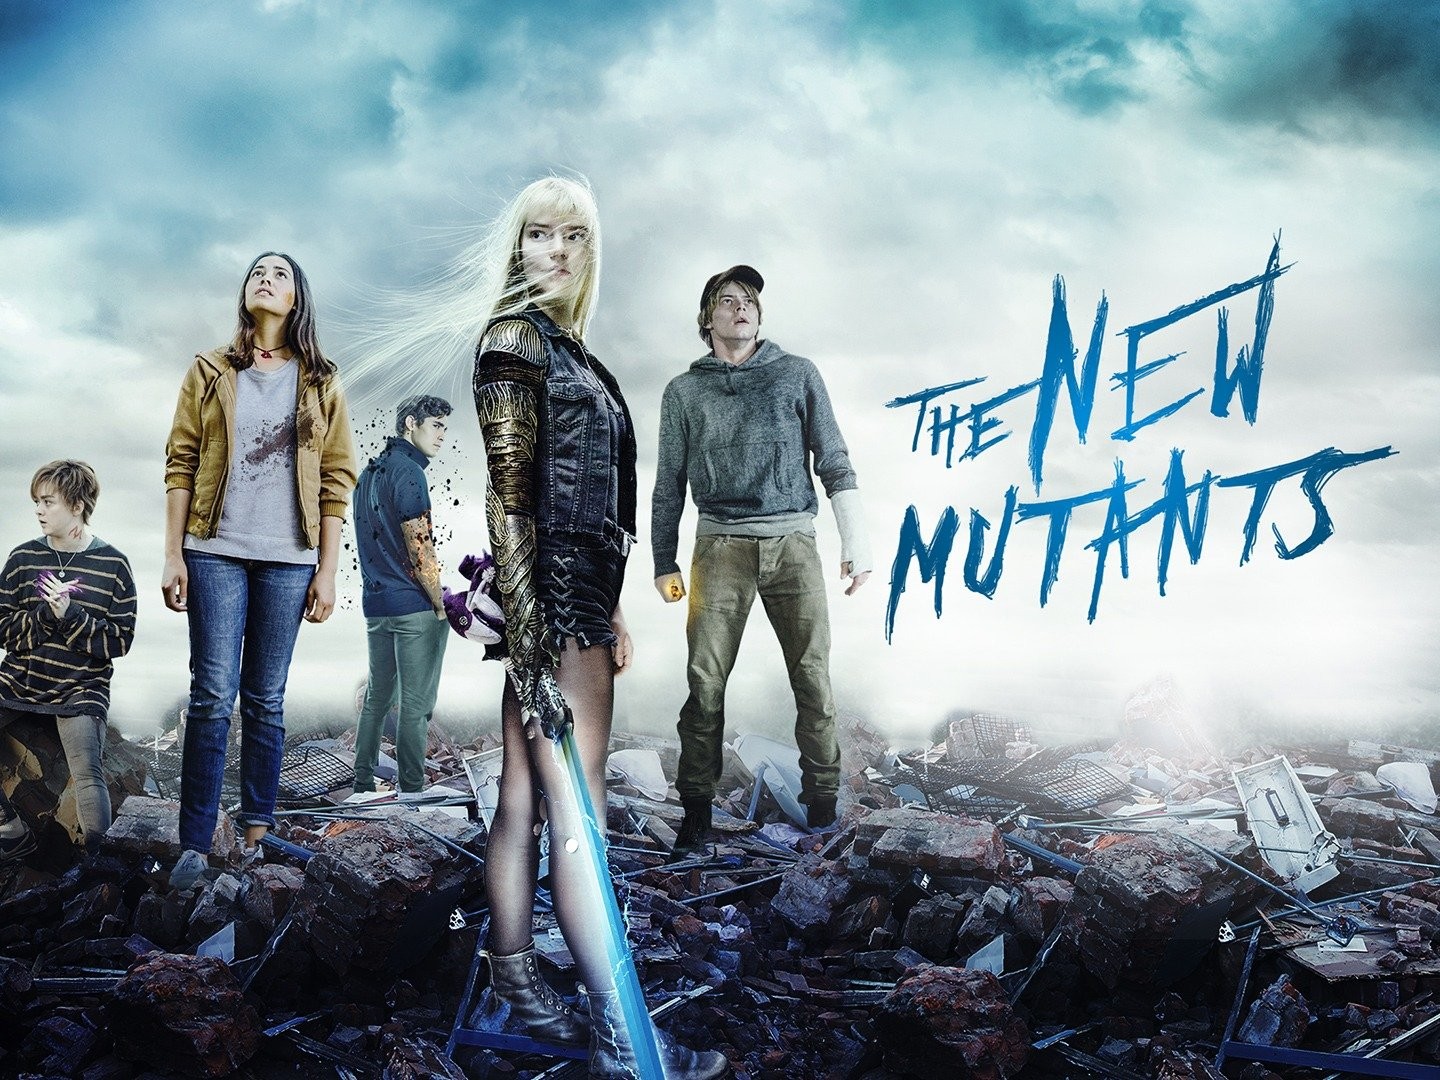 The New Mutants: Trailer 1 - Trailers & Videos - Rotten Tomatoes